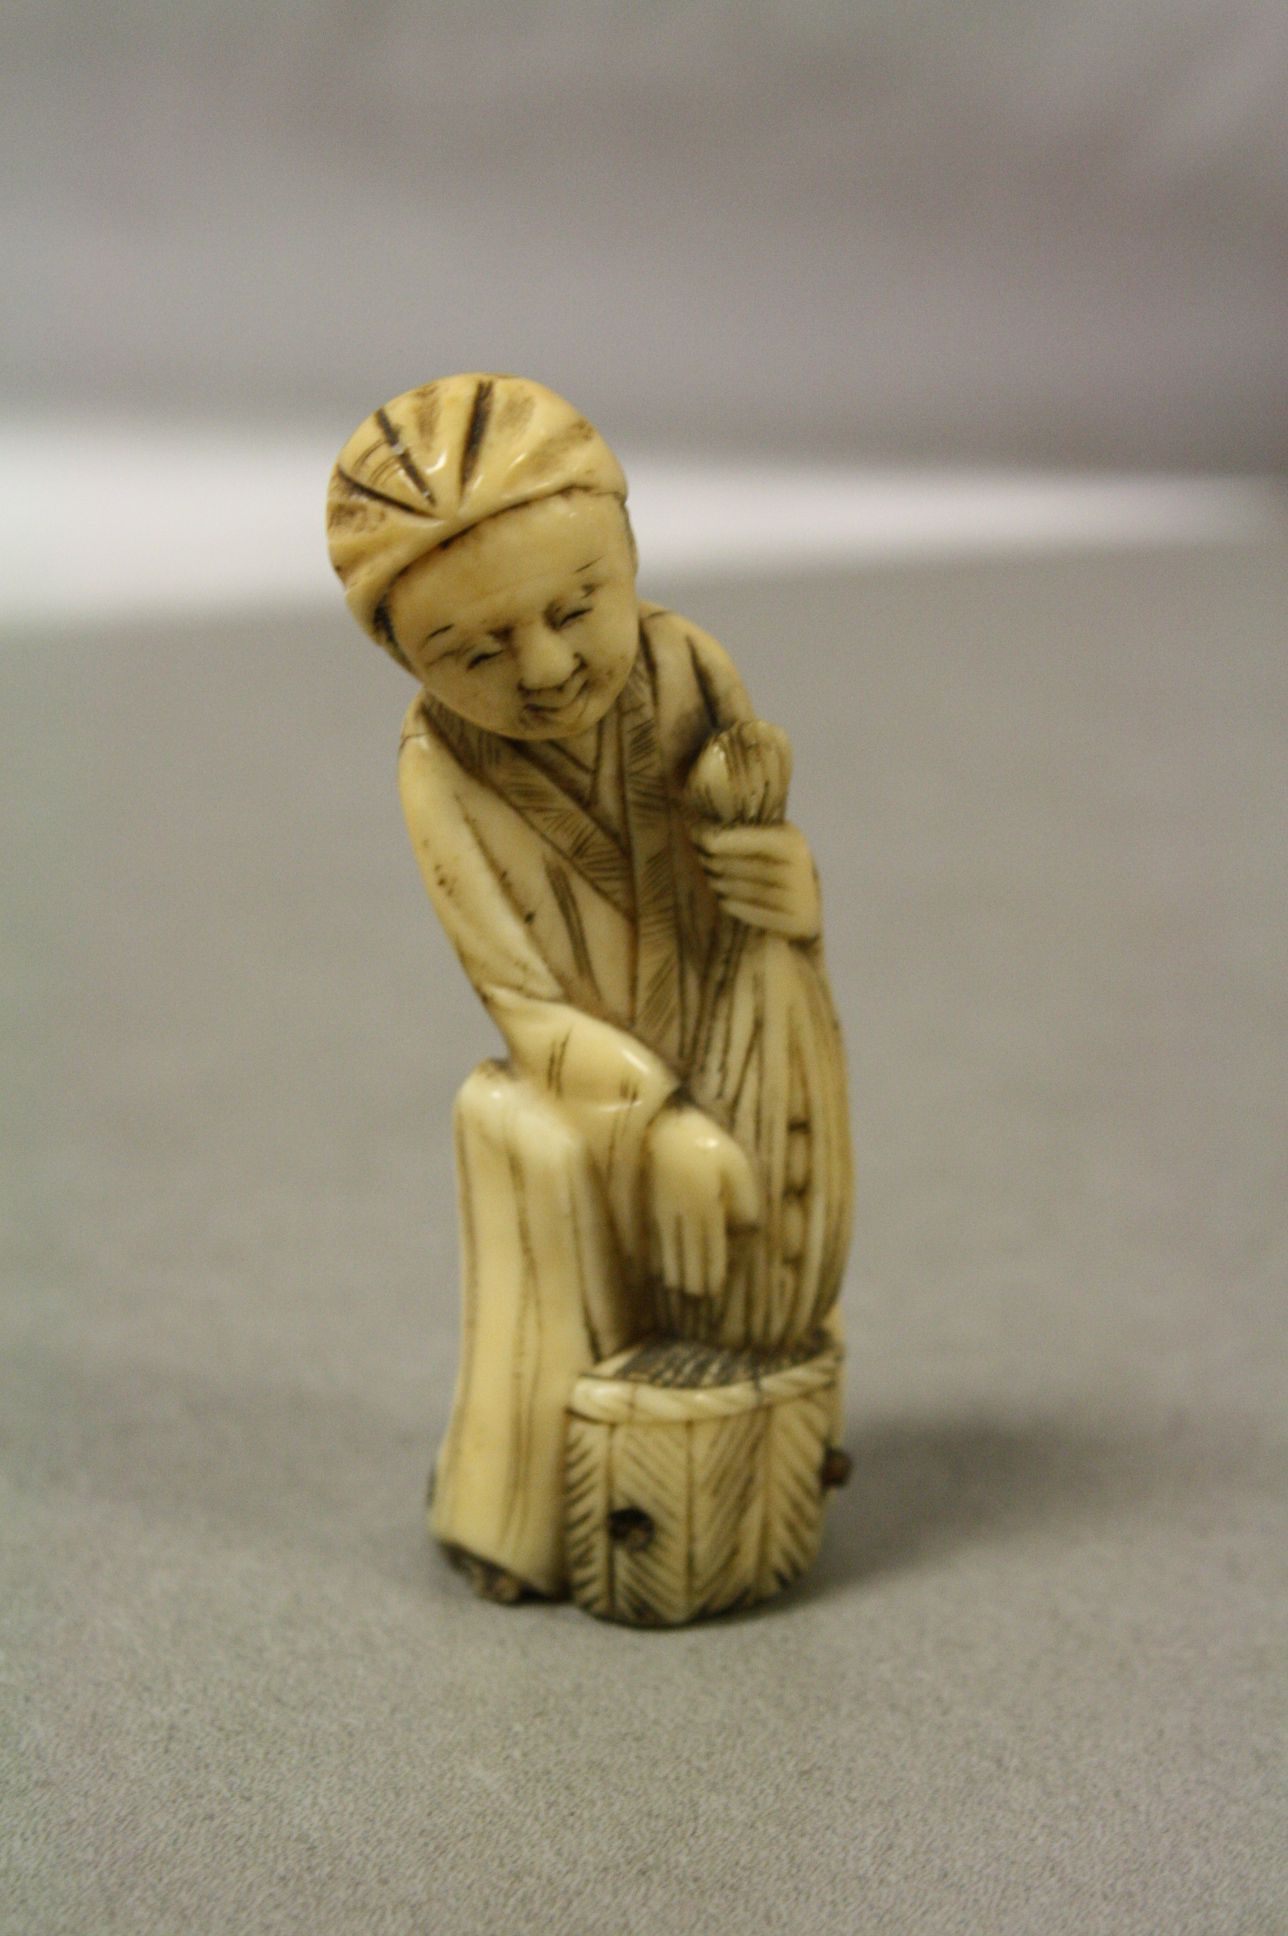 Antique ivory netsuke in the form of a man with net